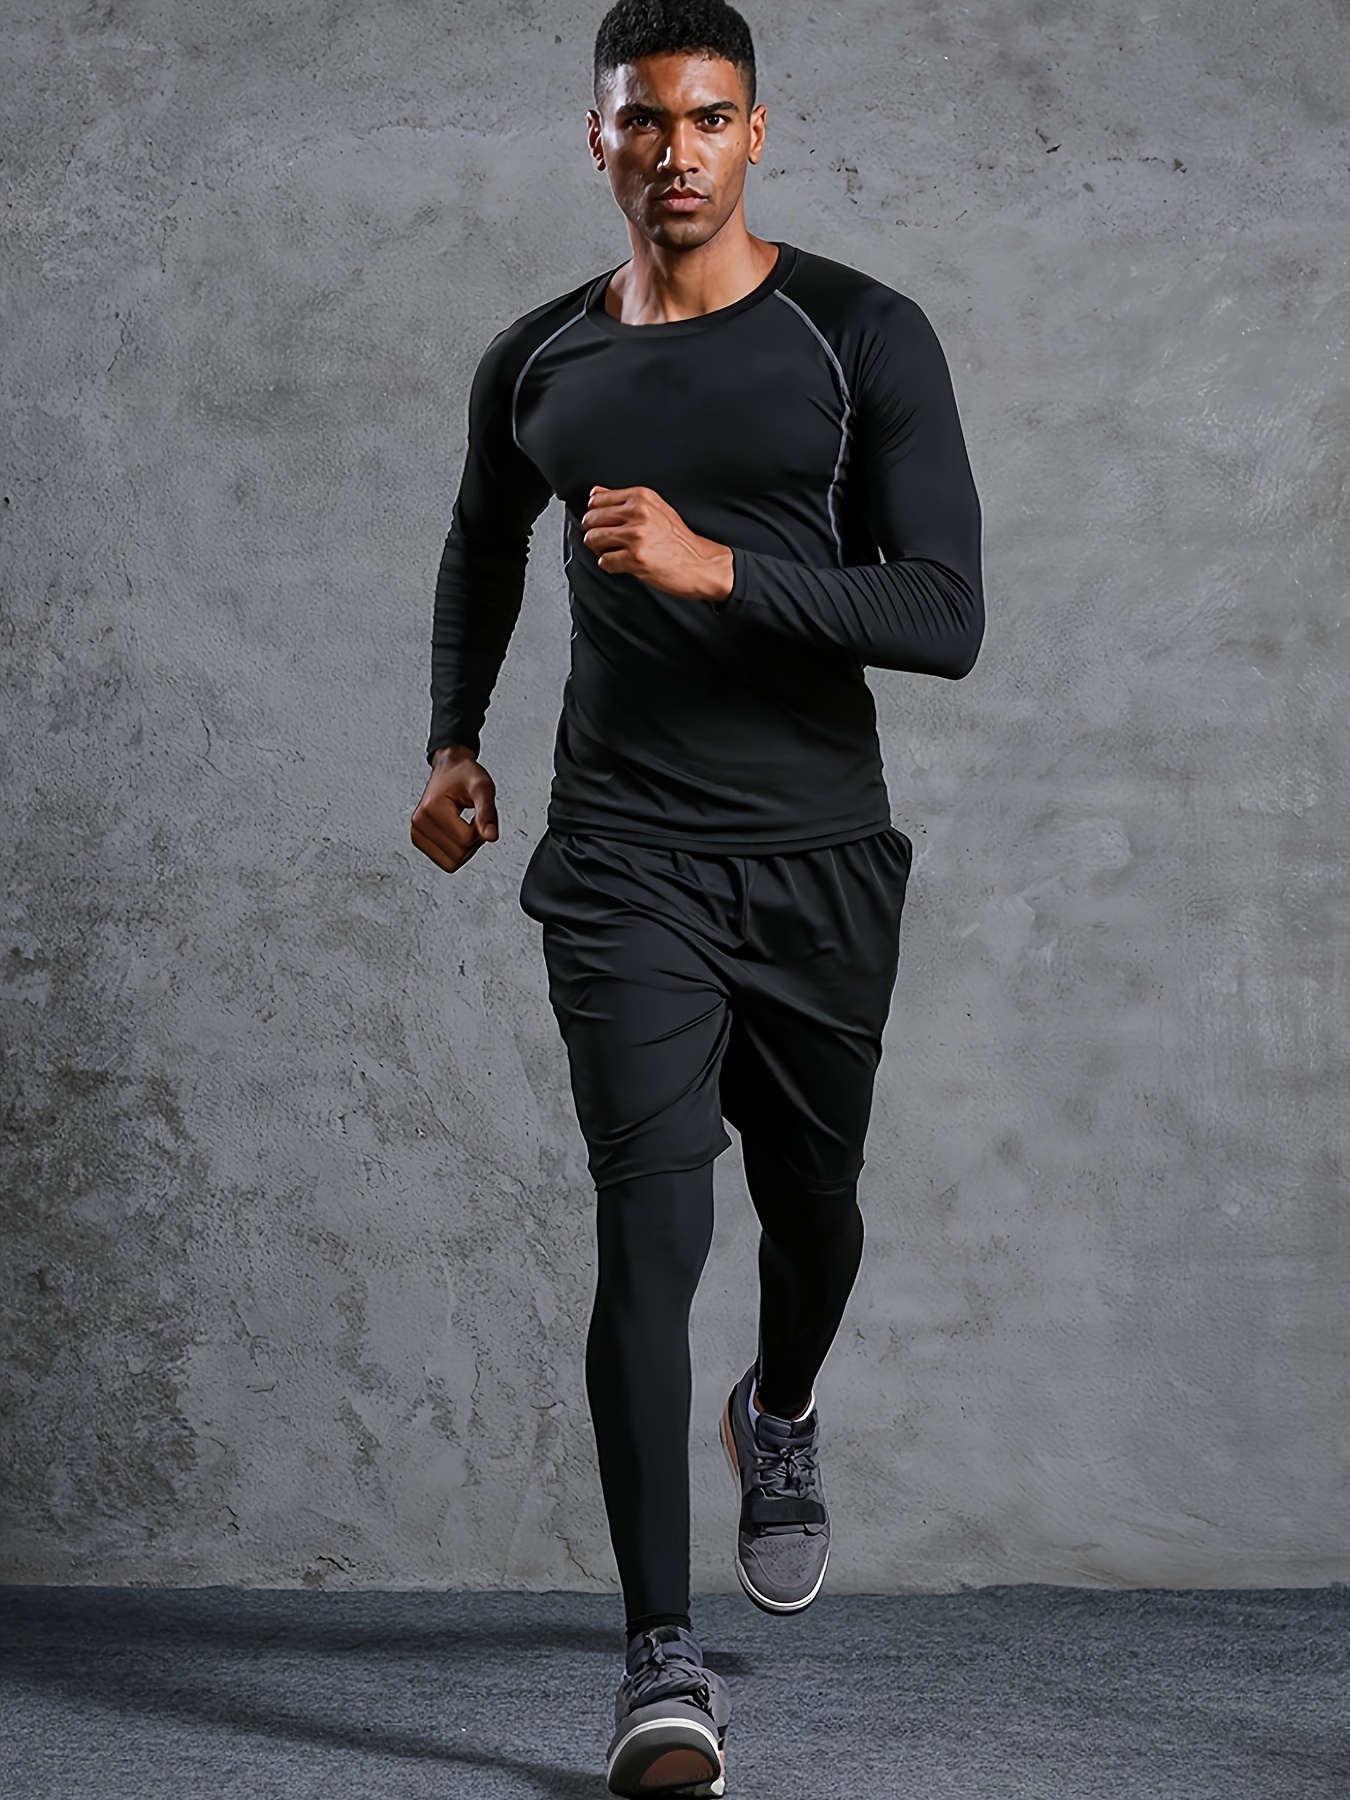 Fitness Suit Men's Workout Clothes Running Quick-Drying Gym Sports